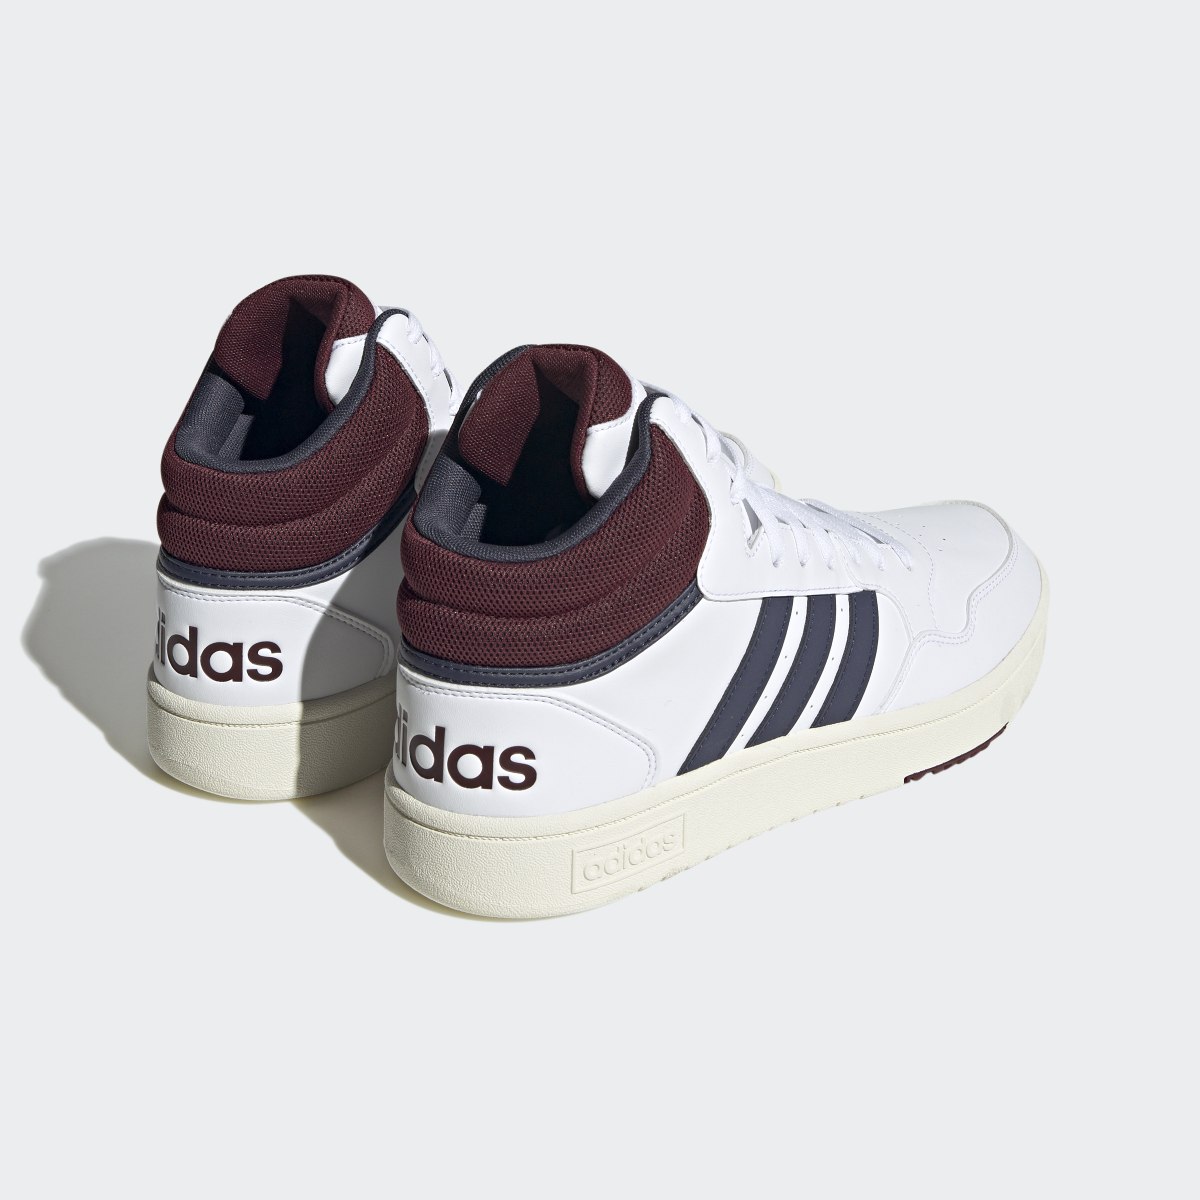 Adidas Chaussure Hoops 3.0 Mid Lifestyle Basketball Classic Vintage. 6